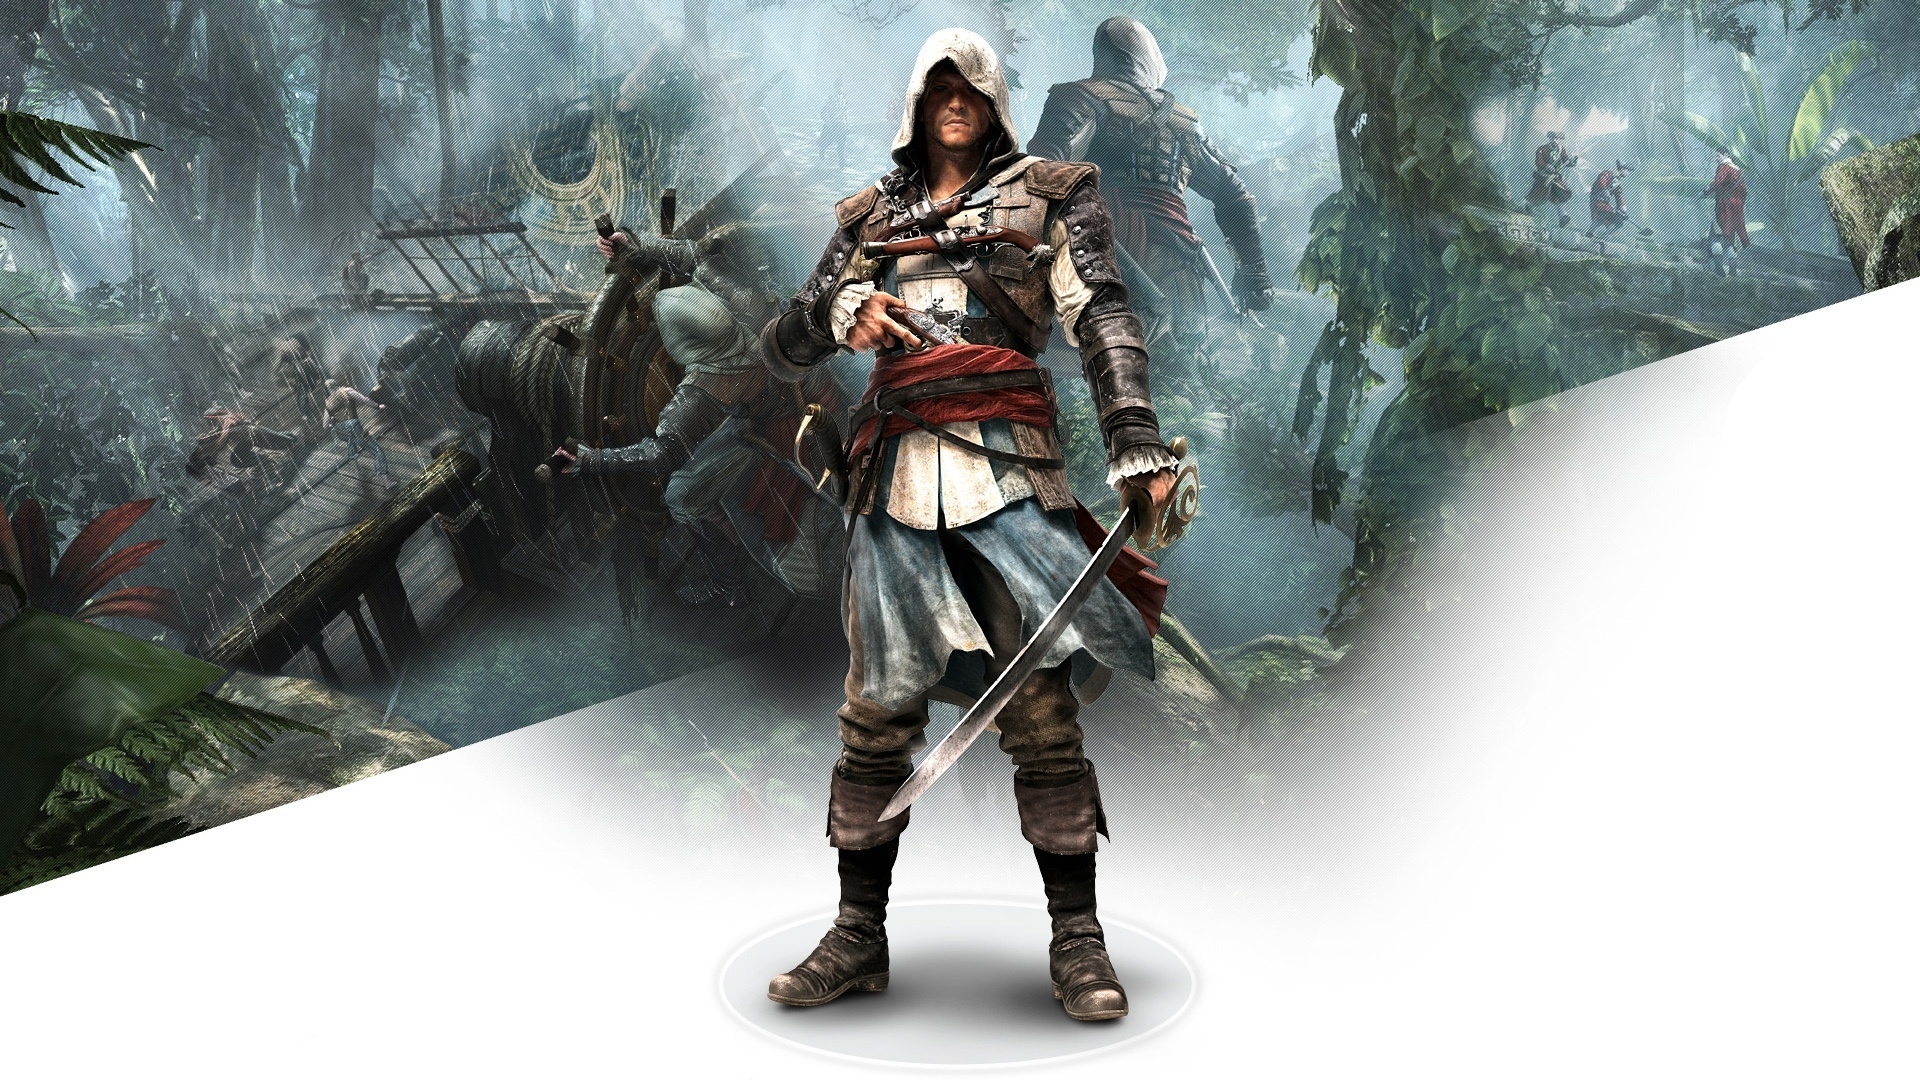 Assassins Creed 4 for 1920 x 1080 HDTV 1080p resolution